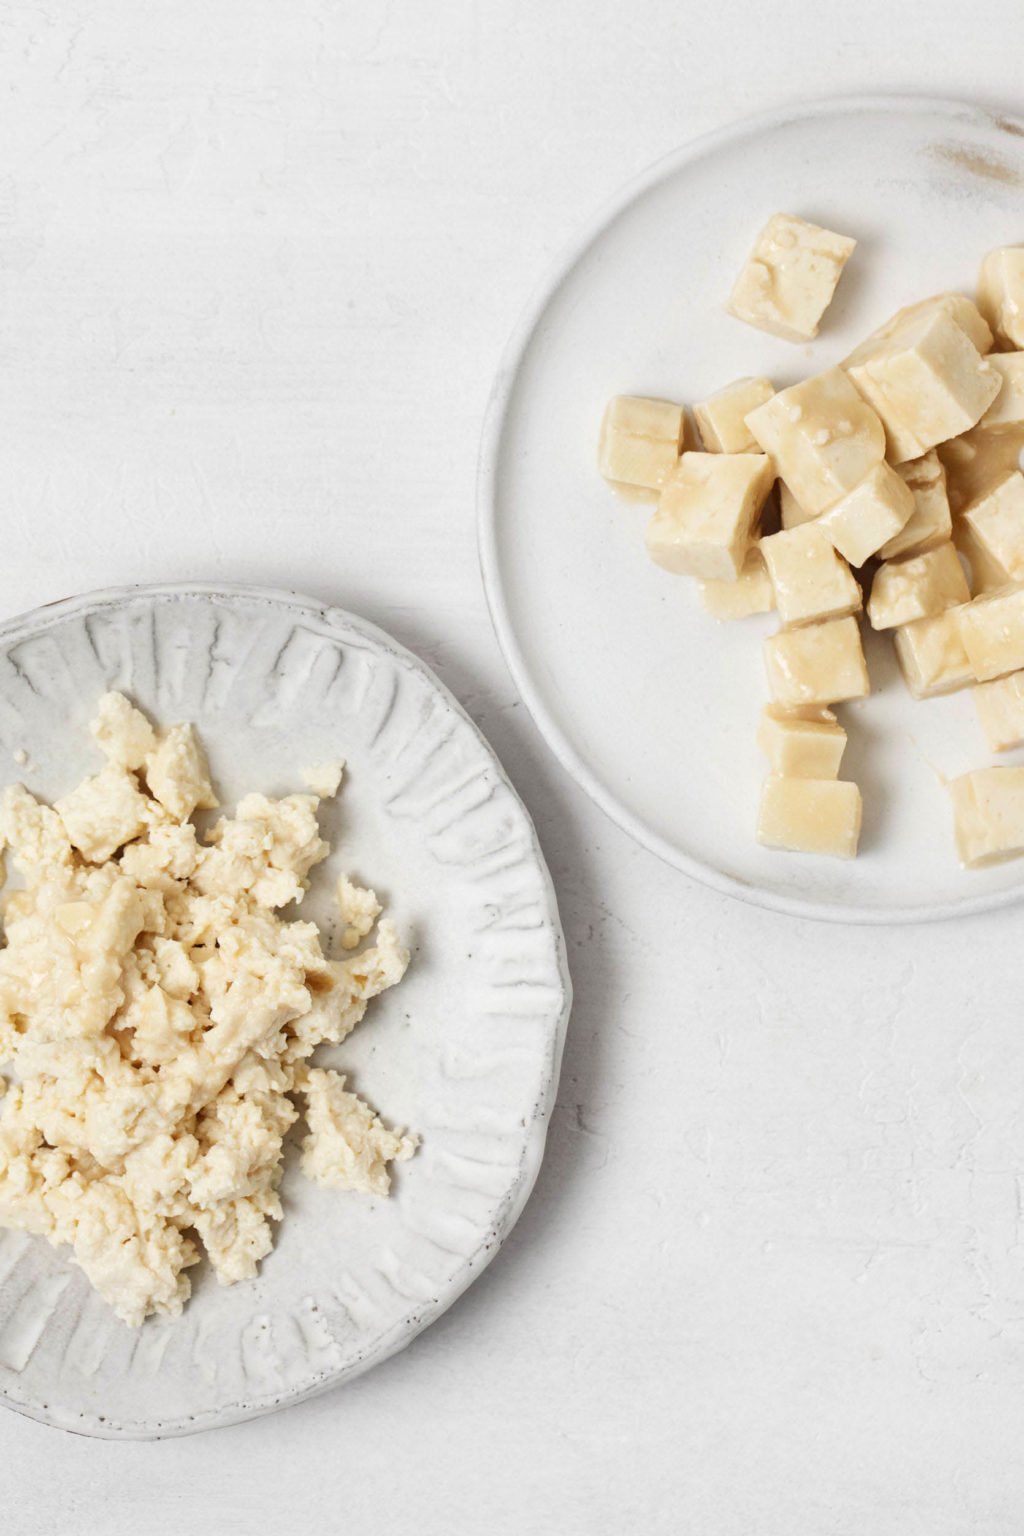 Tofu has been crumbled and cubed. The prepared protein is served on two small plates.